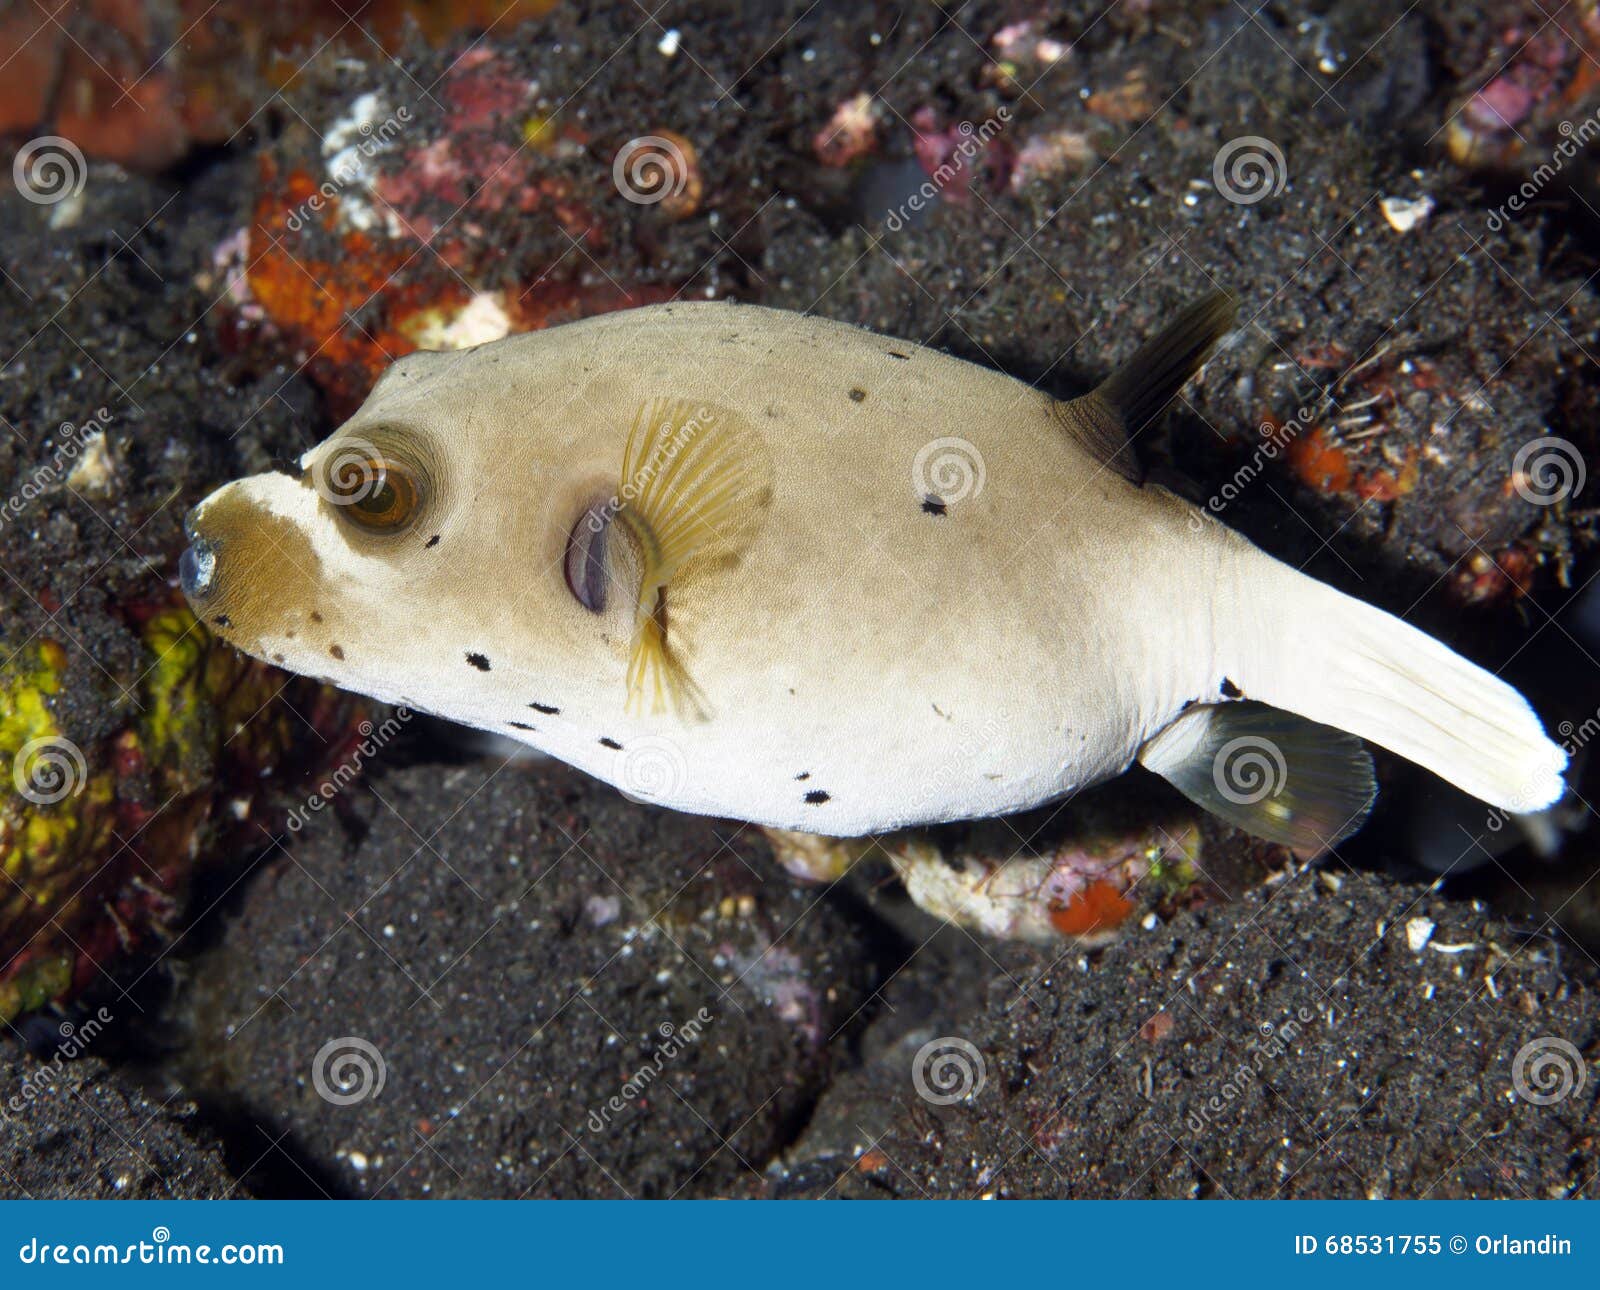 Black-Spotted Puffer stock image. Image of world, tetraodontidae - 68531755